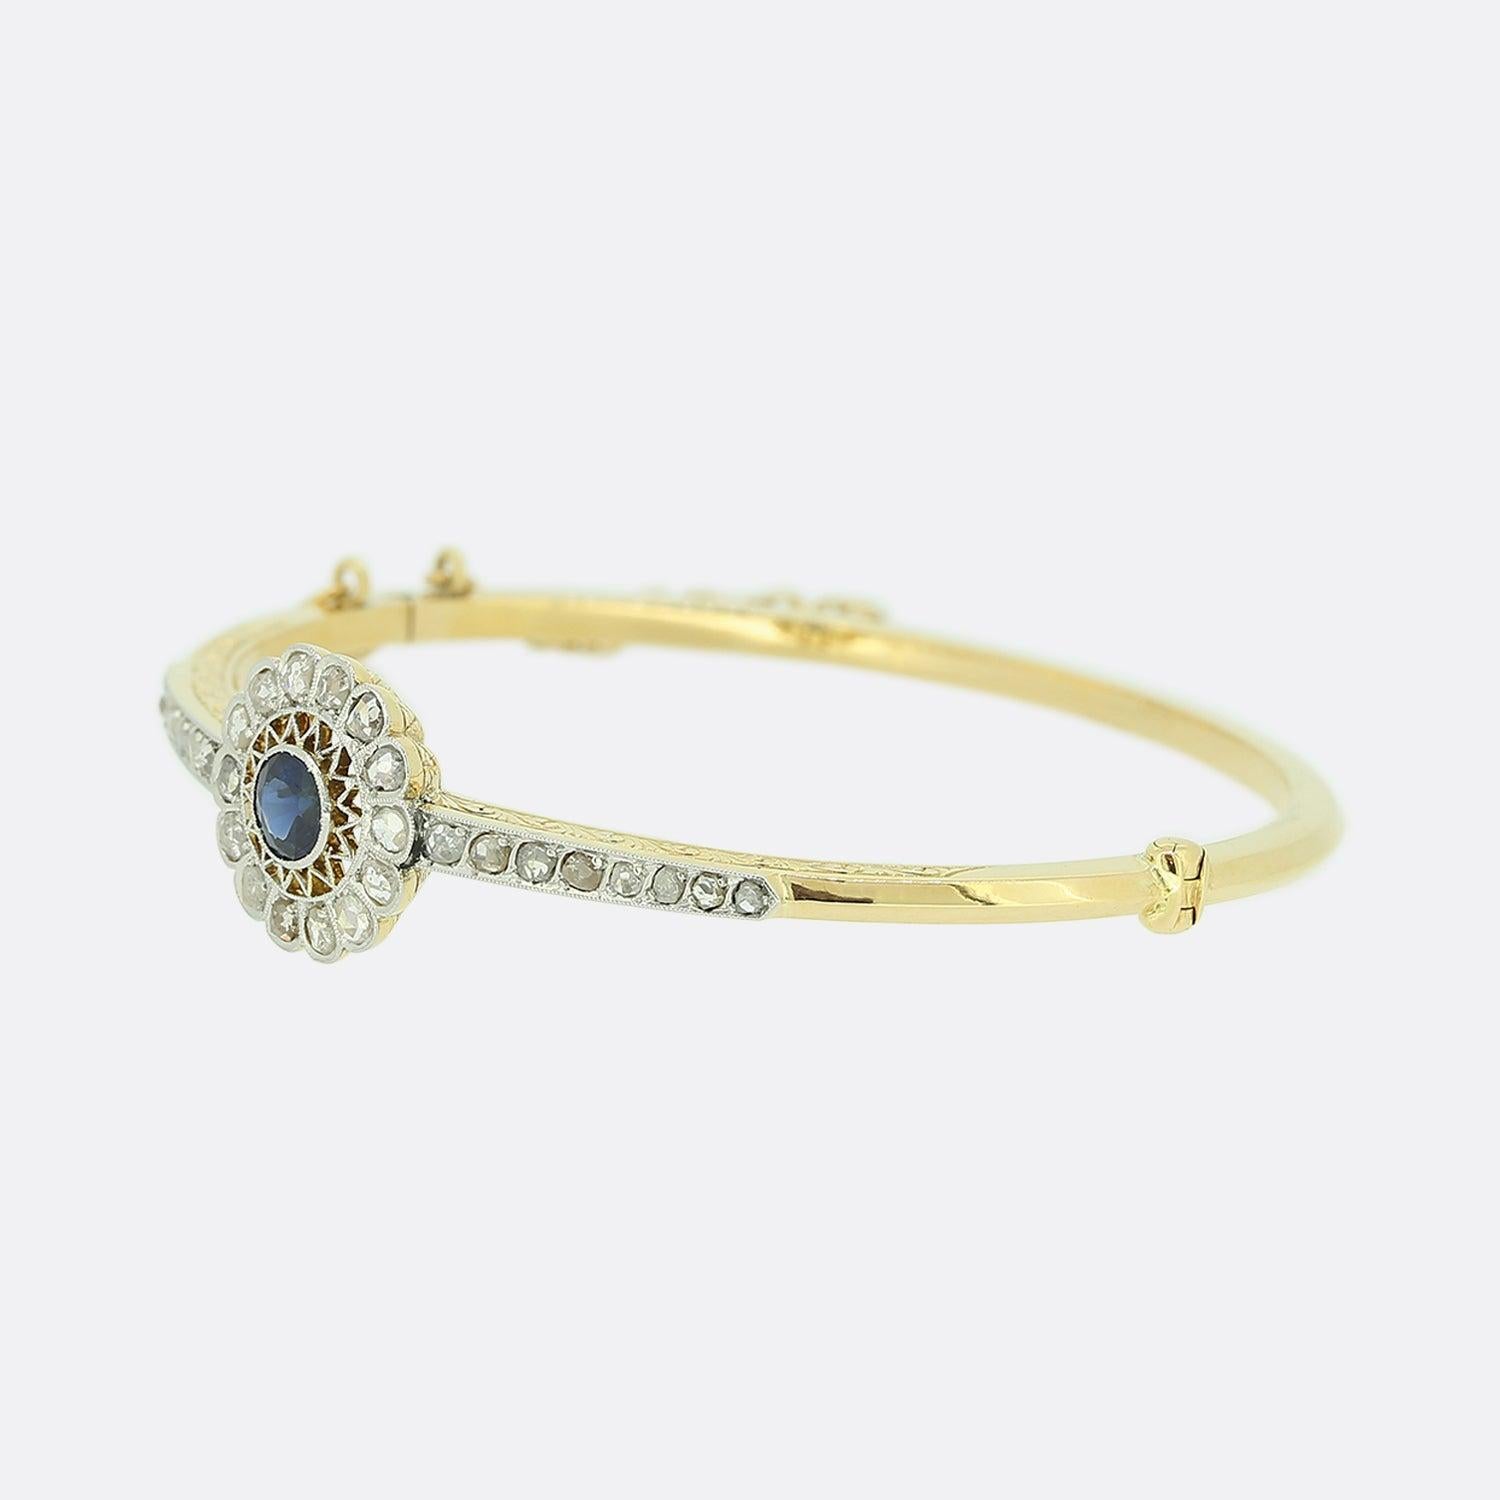 This is a beautiful 18ct yellow gold bangle from the Edwardian era. The bangle features a central sapphire surrounded by a border of rose cut diamonds and a further 8 diamonds on each shoulder. The dark blue of the sapphire is highly complimented by